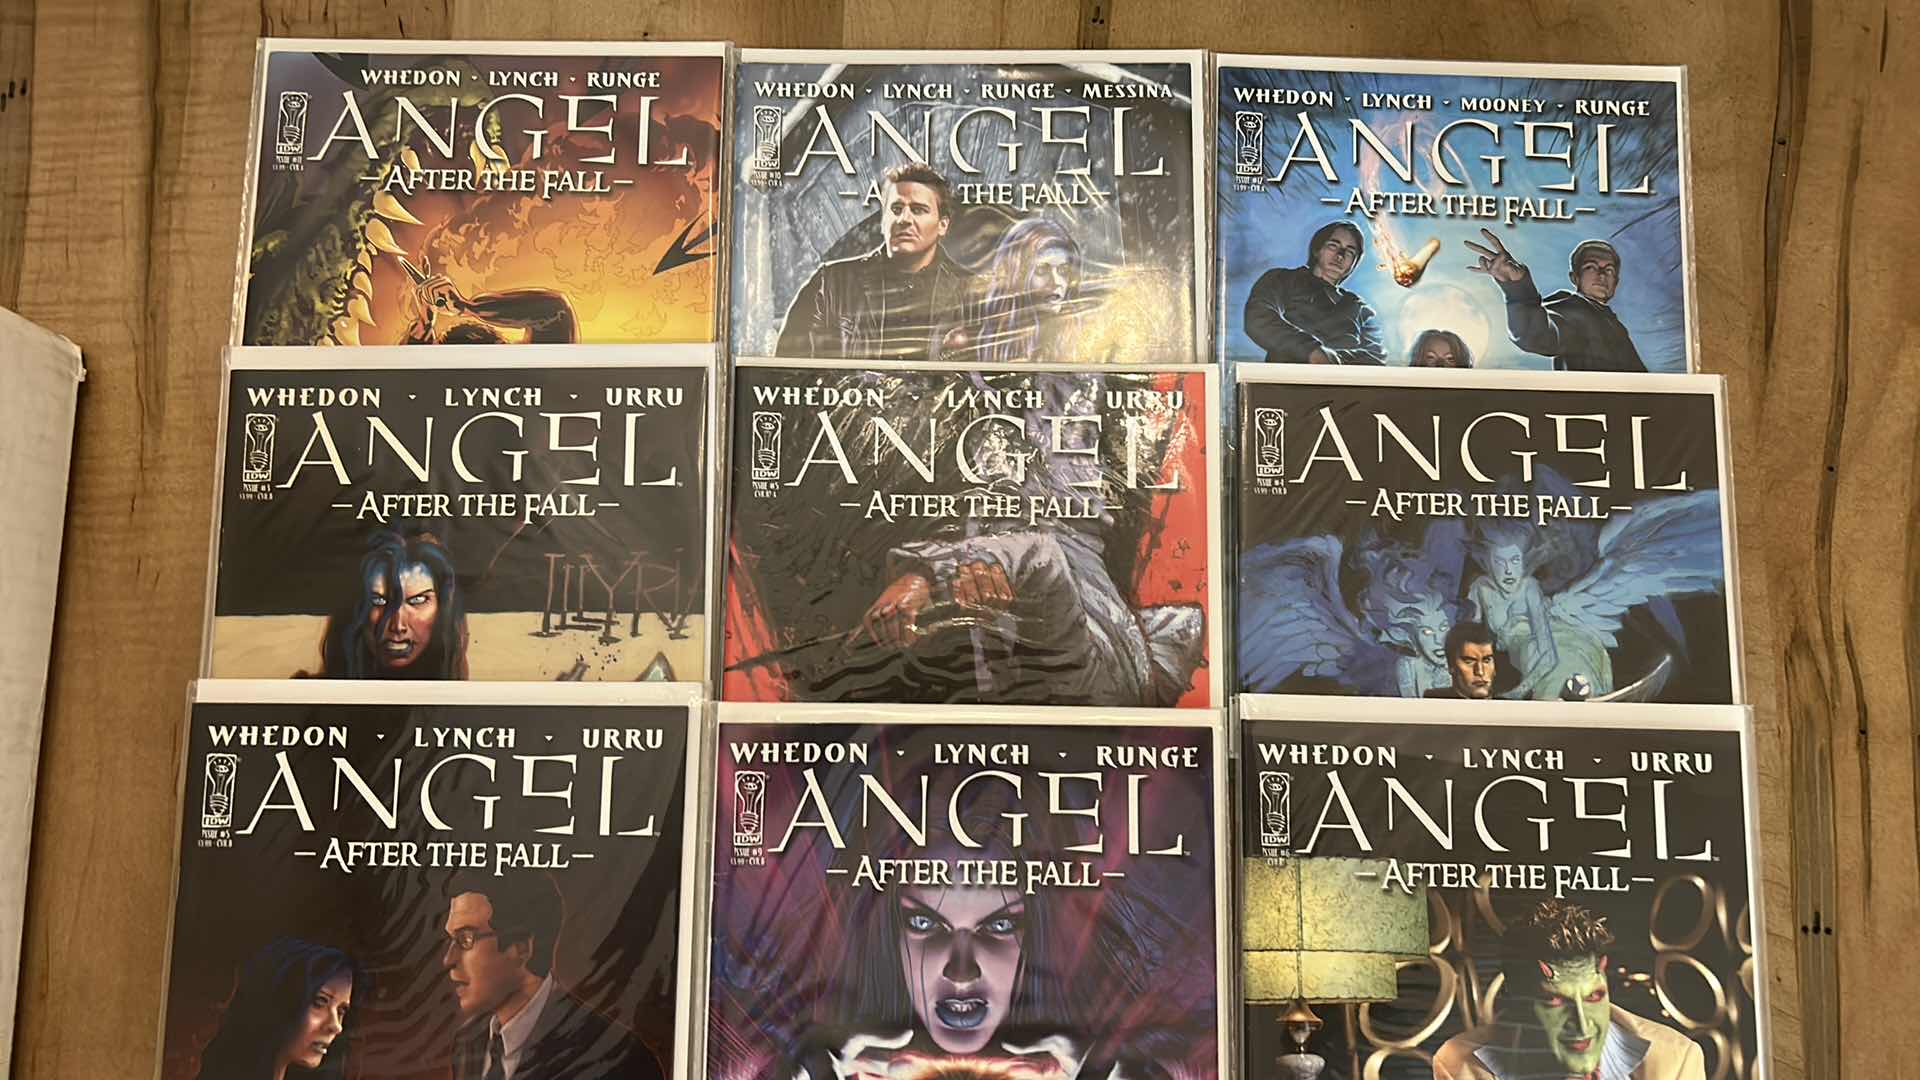 Photo 6 of 9 - ANGEL AFTER THE FALL COMIC BOOKS